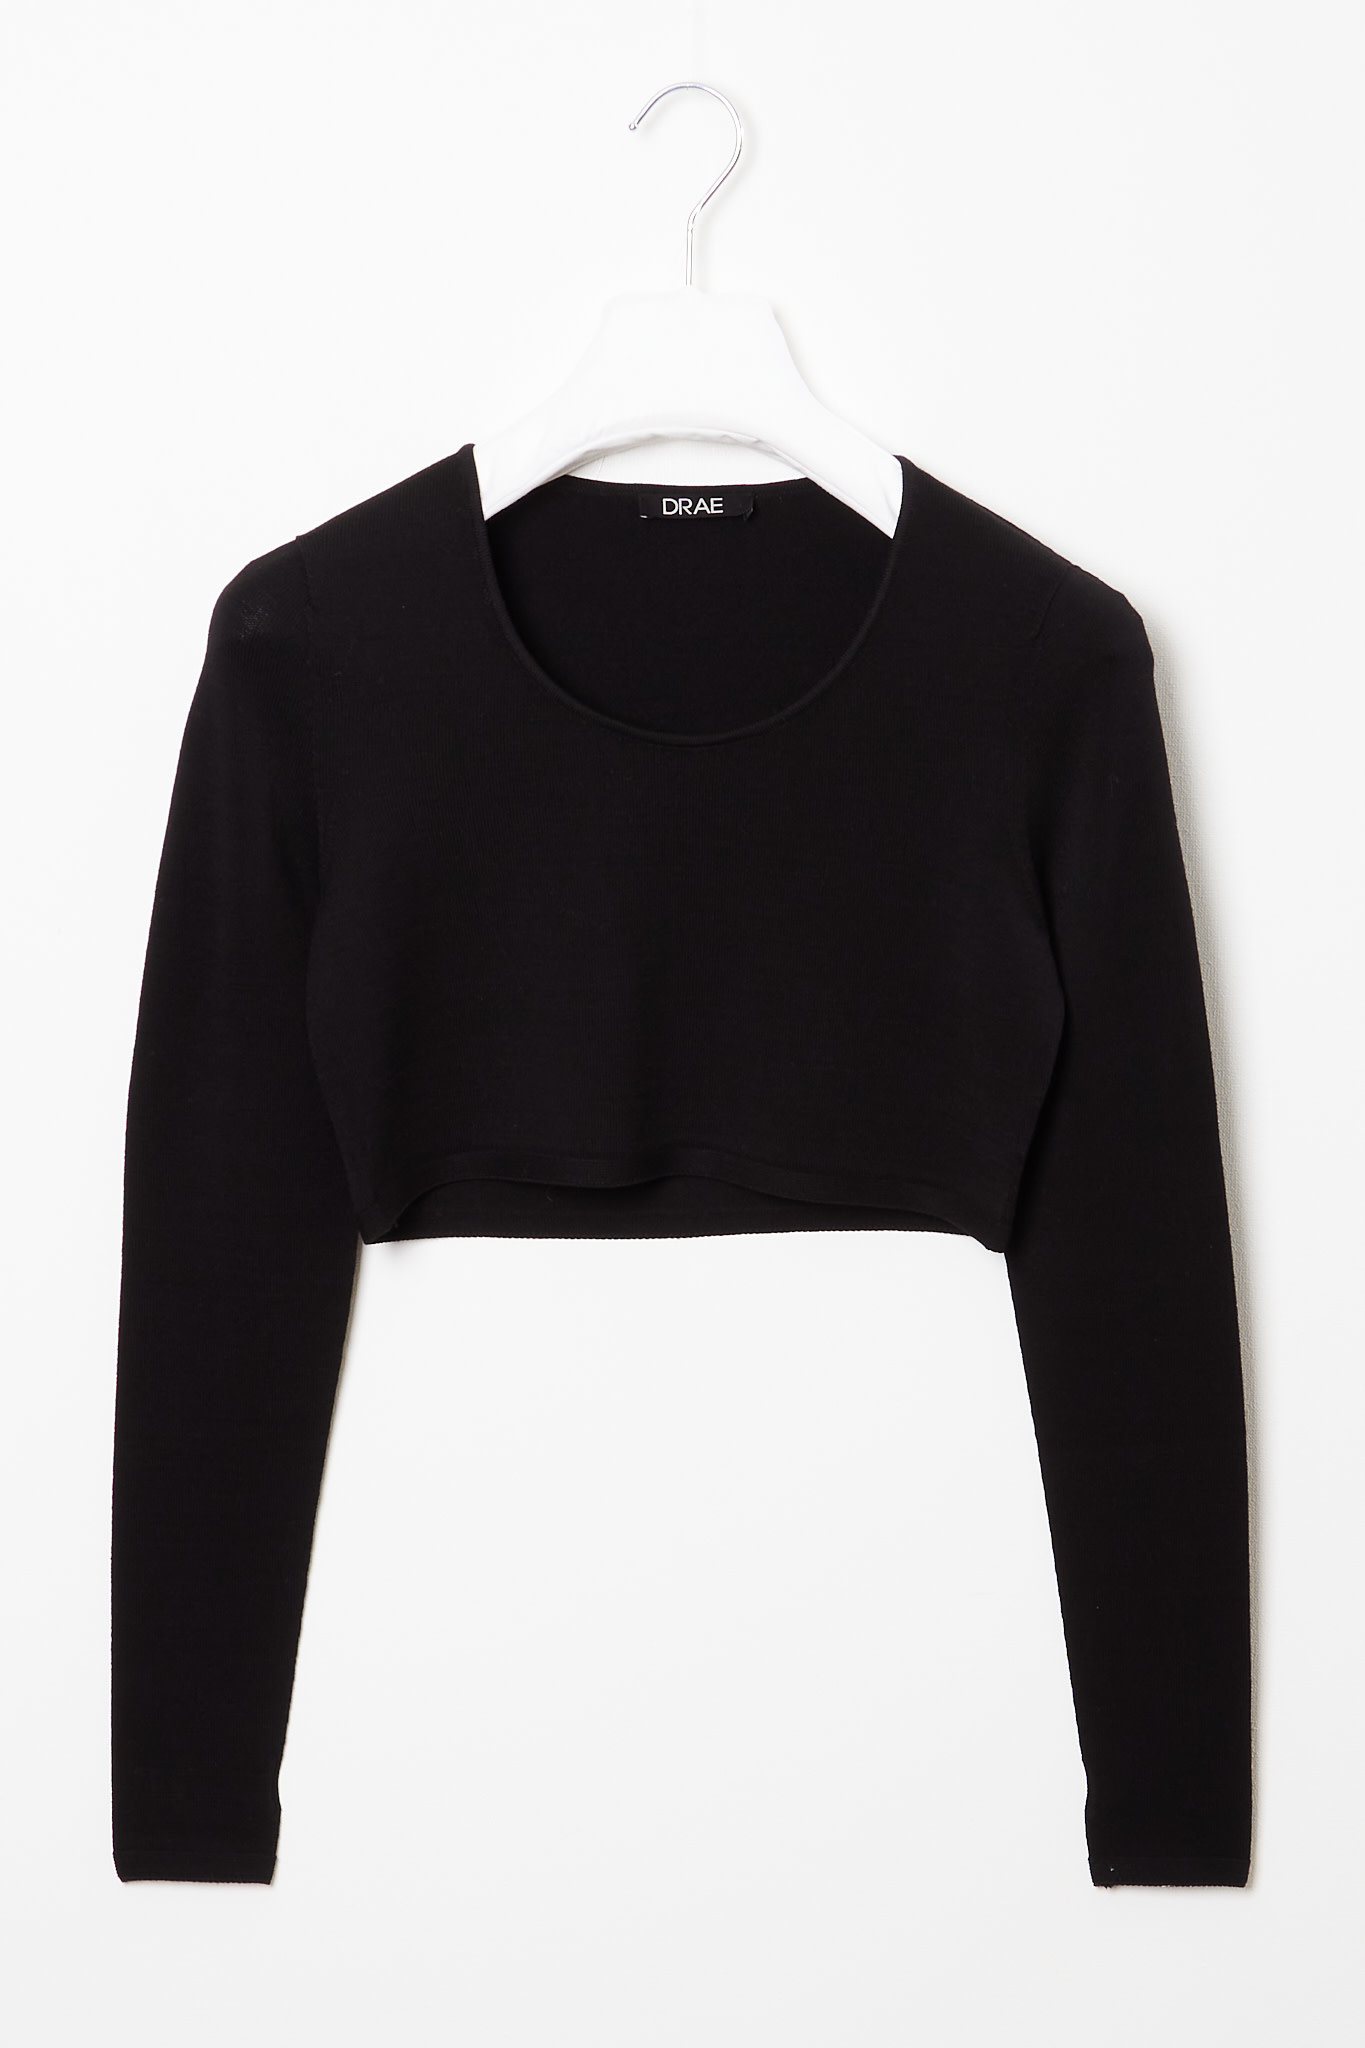  - Wholegarment cropped knit top